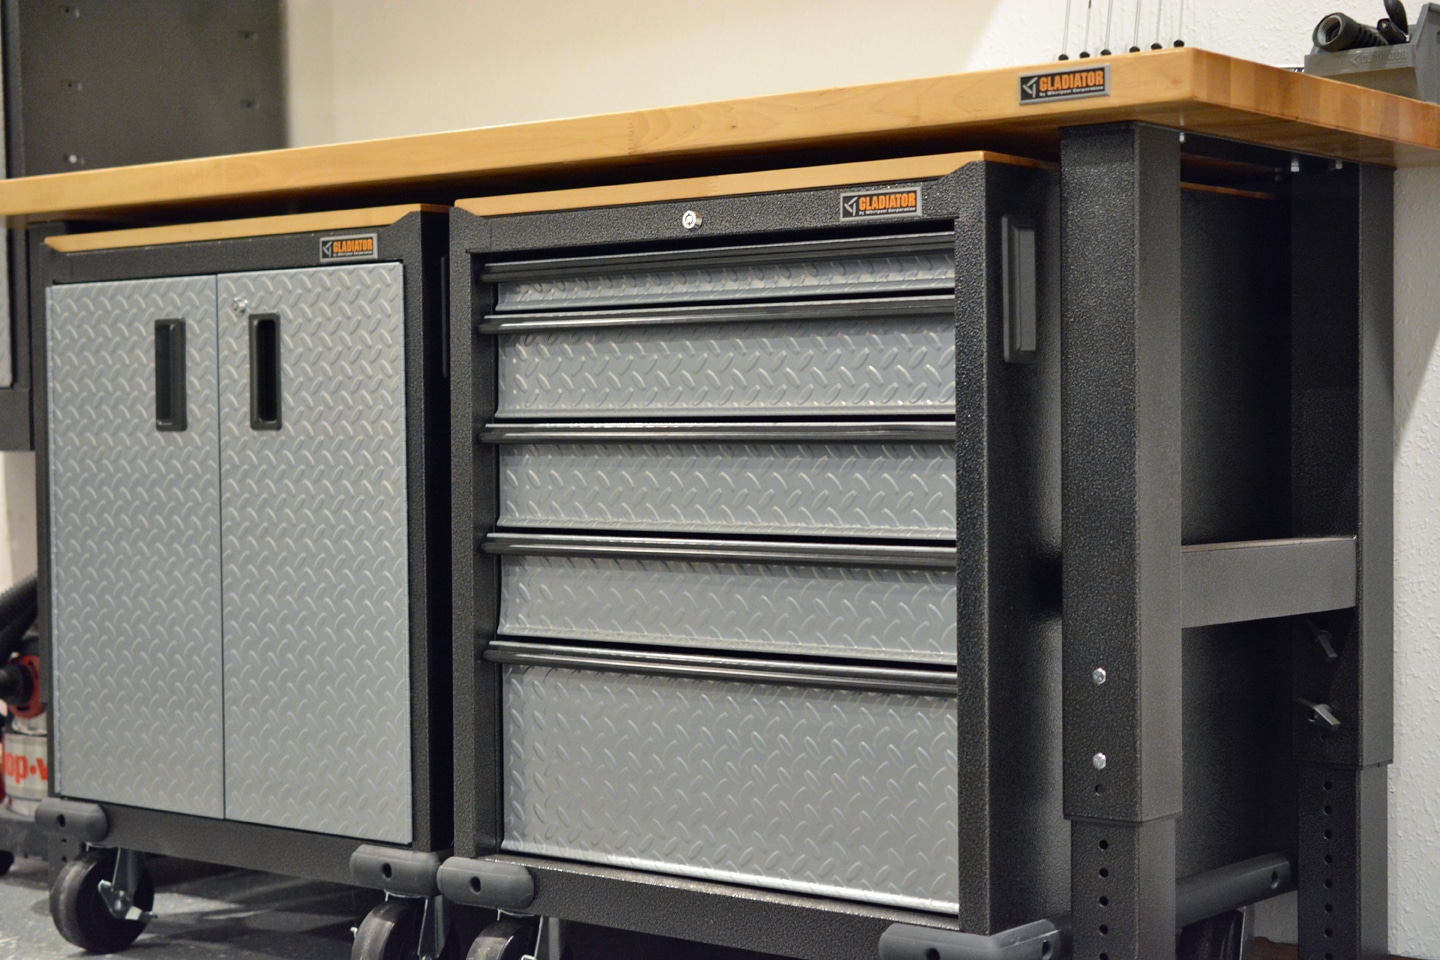 Gladiator GearDrawer and GearBox rolling storage cabinets (Review)